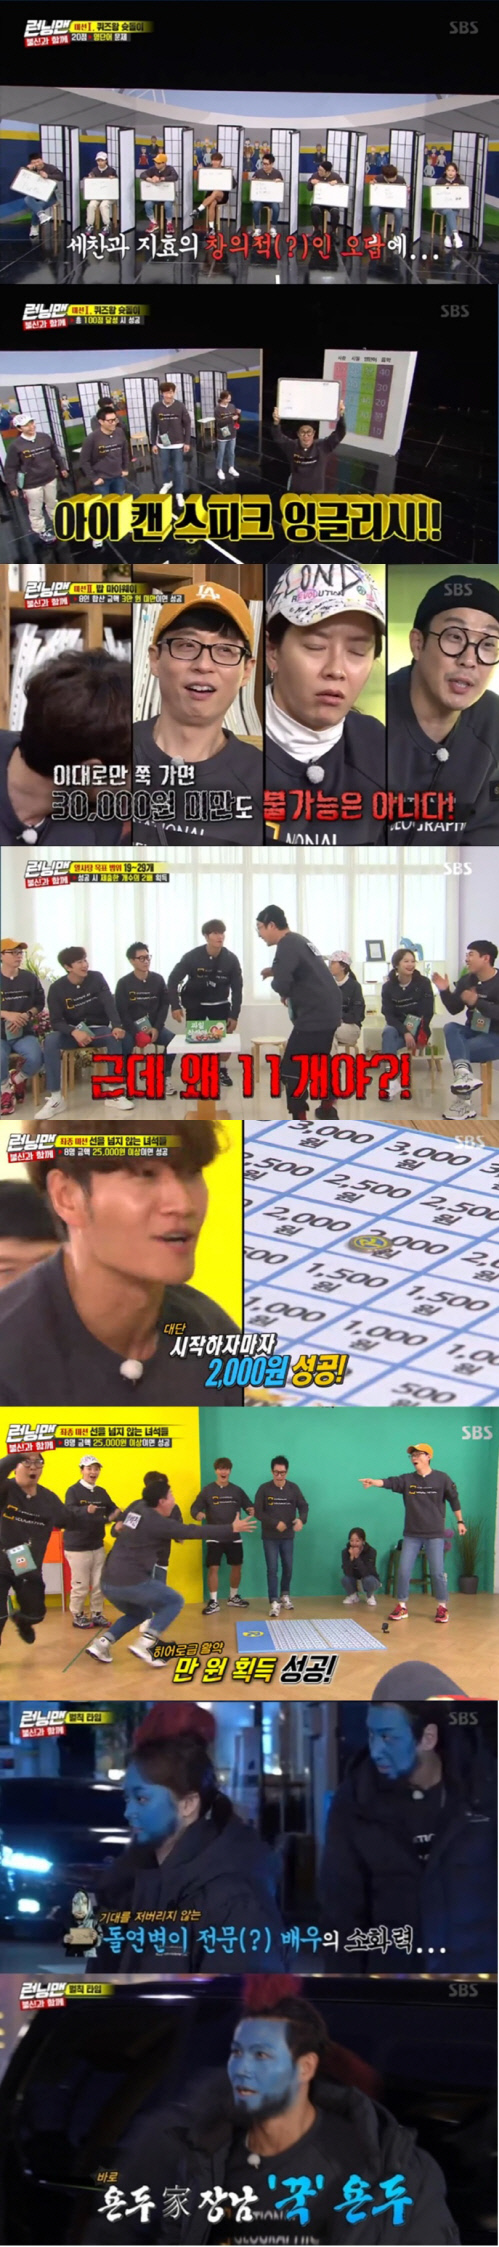 According to Nielsen Korea, a TV viewer rating research institute, Running Man, which was broadcast on the 1st, was ranked # 1 in the same time zone entertainment with 4.1% of 2049 target TV viewer ratings (based on the second part of the Seoul metropolitan area furniture TV viewer ratings), which is an important indicator of major advertising officials, surpassing Masked Wang and Donkey Ears.The average TV viewer ratings were 5.5% in the first part and 7.6% in the second part, while the highest TV viewer ratings per minute soared to 8.4%.The broadcast was featured in a special united race with distrust, which was set up for members who had been suspicious and fraught in the past few weeks.In the first mission, The King of Quiz had to be unanimously correct, with all kinds of fouls and the wrong answers of Jeon So-min, but the correct answers came out.In the second mission Bob My Way, Jeon So-min was prominent.One of the eight different menus with different prices was private, and if the sum was less than 30,000 won, it was a power pass.With Ji Suk-jin opting for a high-priced soy sauce, Jeon So-min chose a boiled egg and all the members ate well.On the other hand, the third mission, Answer the Category, which is successful when all the people say the category presented in 8 seconds, failed, and once again the members distrust raised their heads and laughed.Fortunately, in the final mission The Guys who do not cross the line, Yang Se-chan won a 10,000 won in his performance and gave a warm heart.Yang Se-chan won the penalty exemption by ranking first by member, and the penalty was confirmed when Jeon So-min and Lee Kwang-soo were ranked 7th and 8th.The penalists Jeon So-min and Lee Kwang-soo had to sell Bungeo-pang on the street with the Running Man-pyo Megahit makeup Yondu makeup, and pointed out Kim Jong-kook as additional penalties.The three humiliation sales sites rose to 8.4% of the highest TV viewer ratings per minute, accounting for the best one minute.Photos  SBS